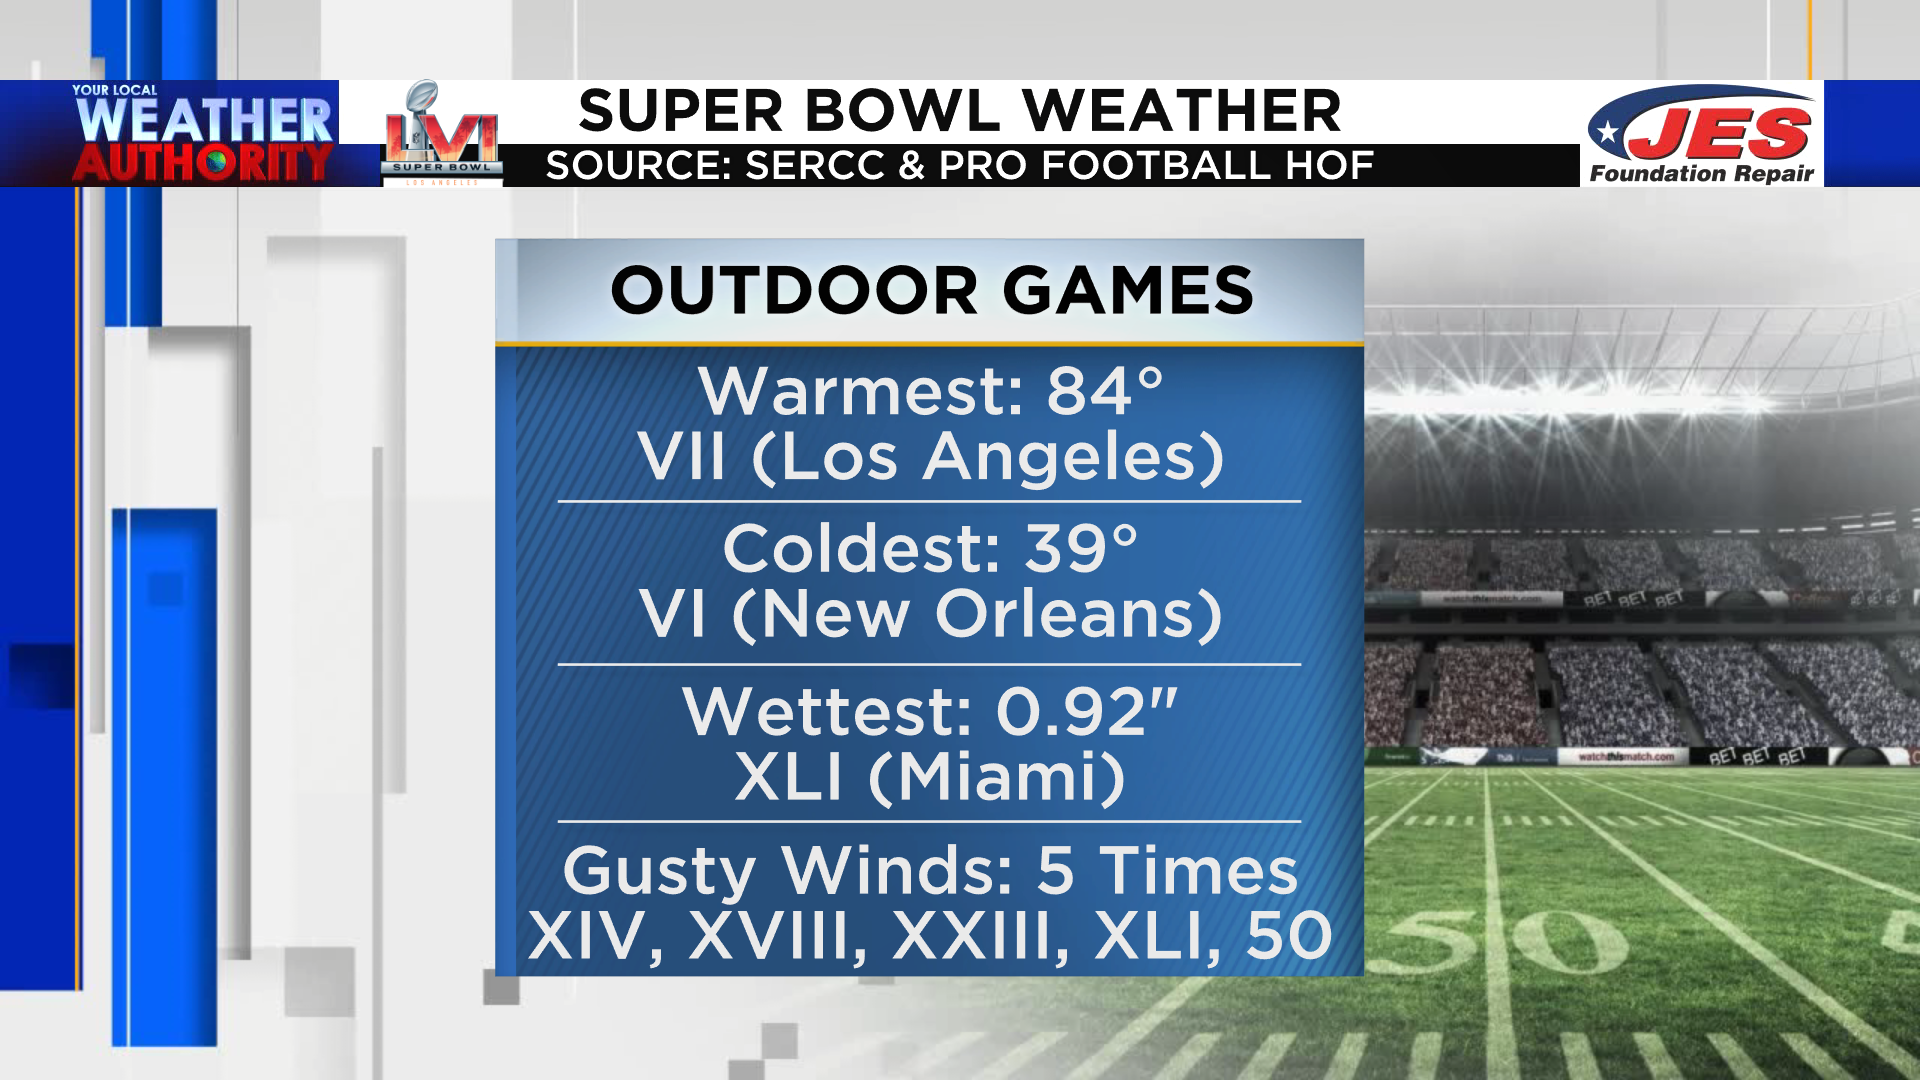 Super Bowl 2022 weather: Could Sunday's game be hottest on record?